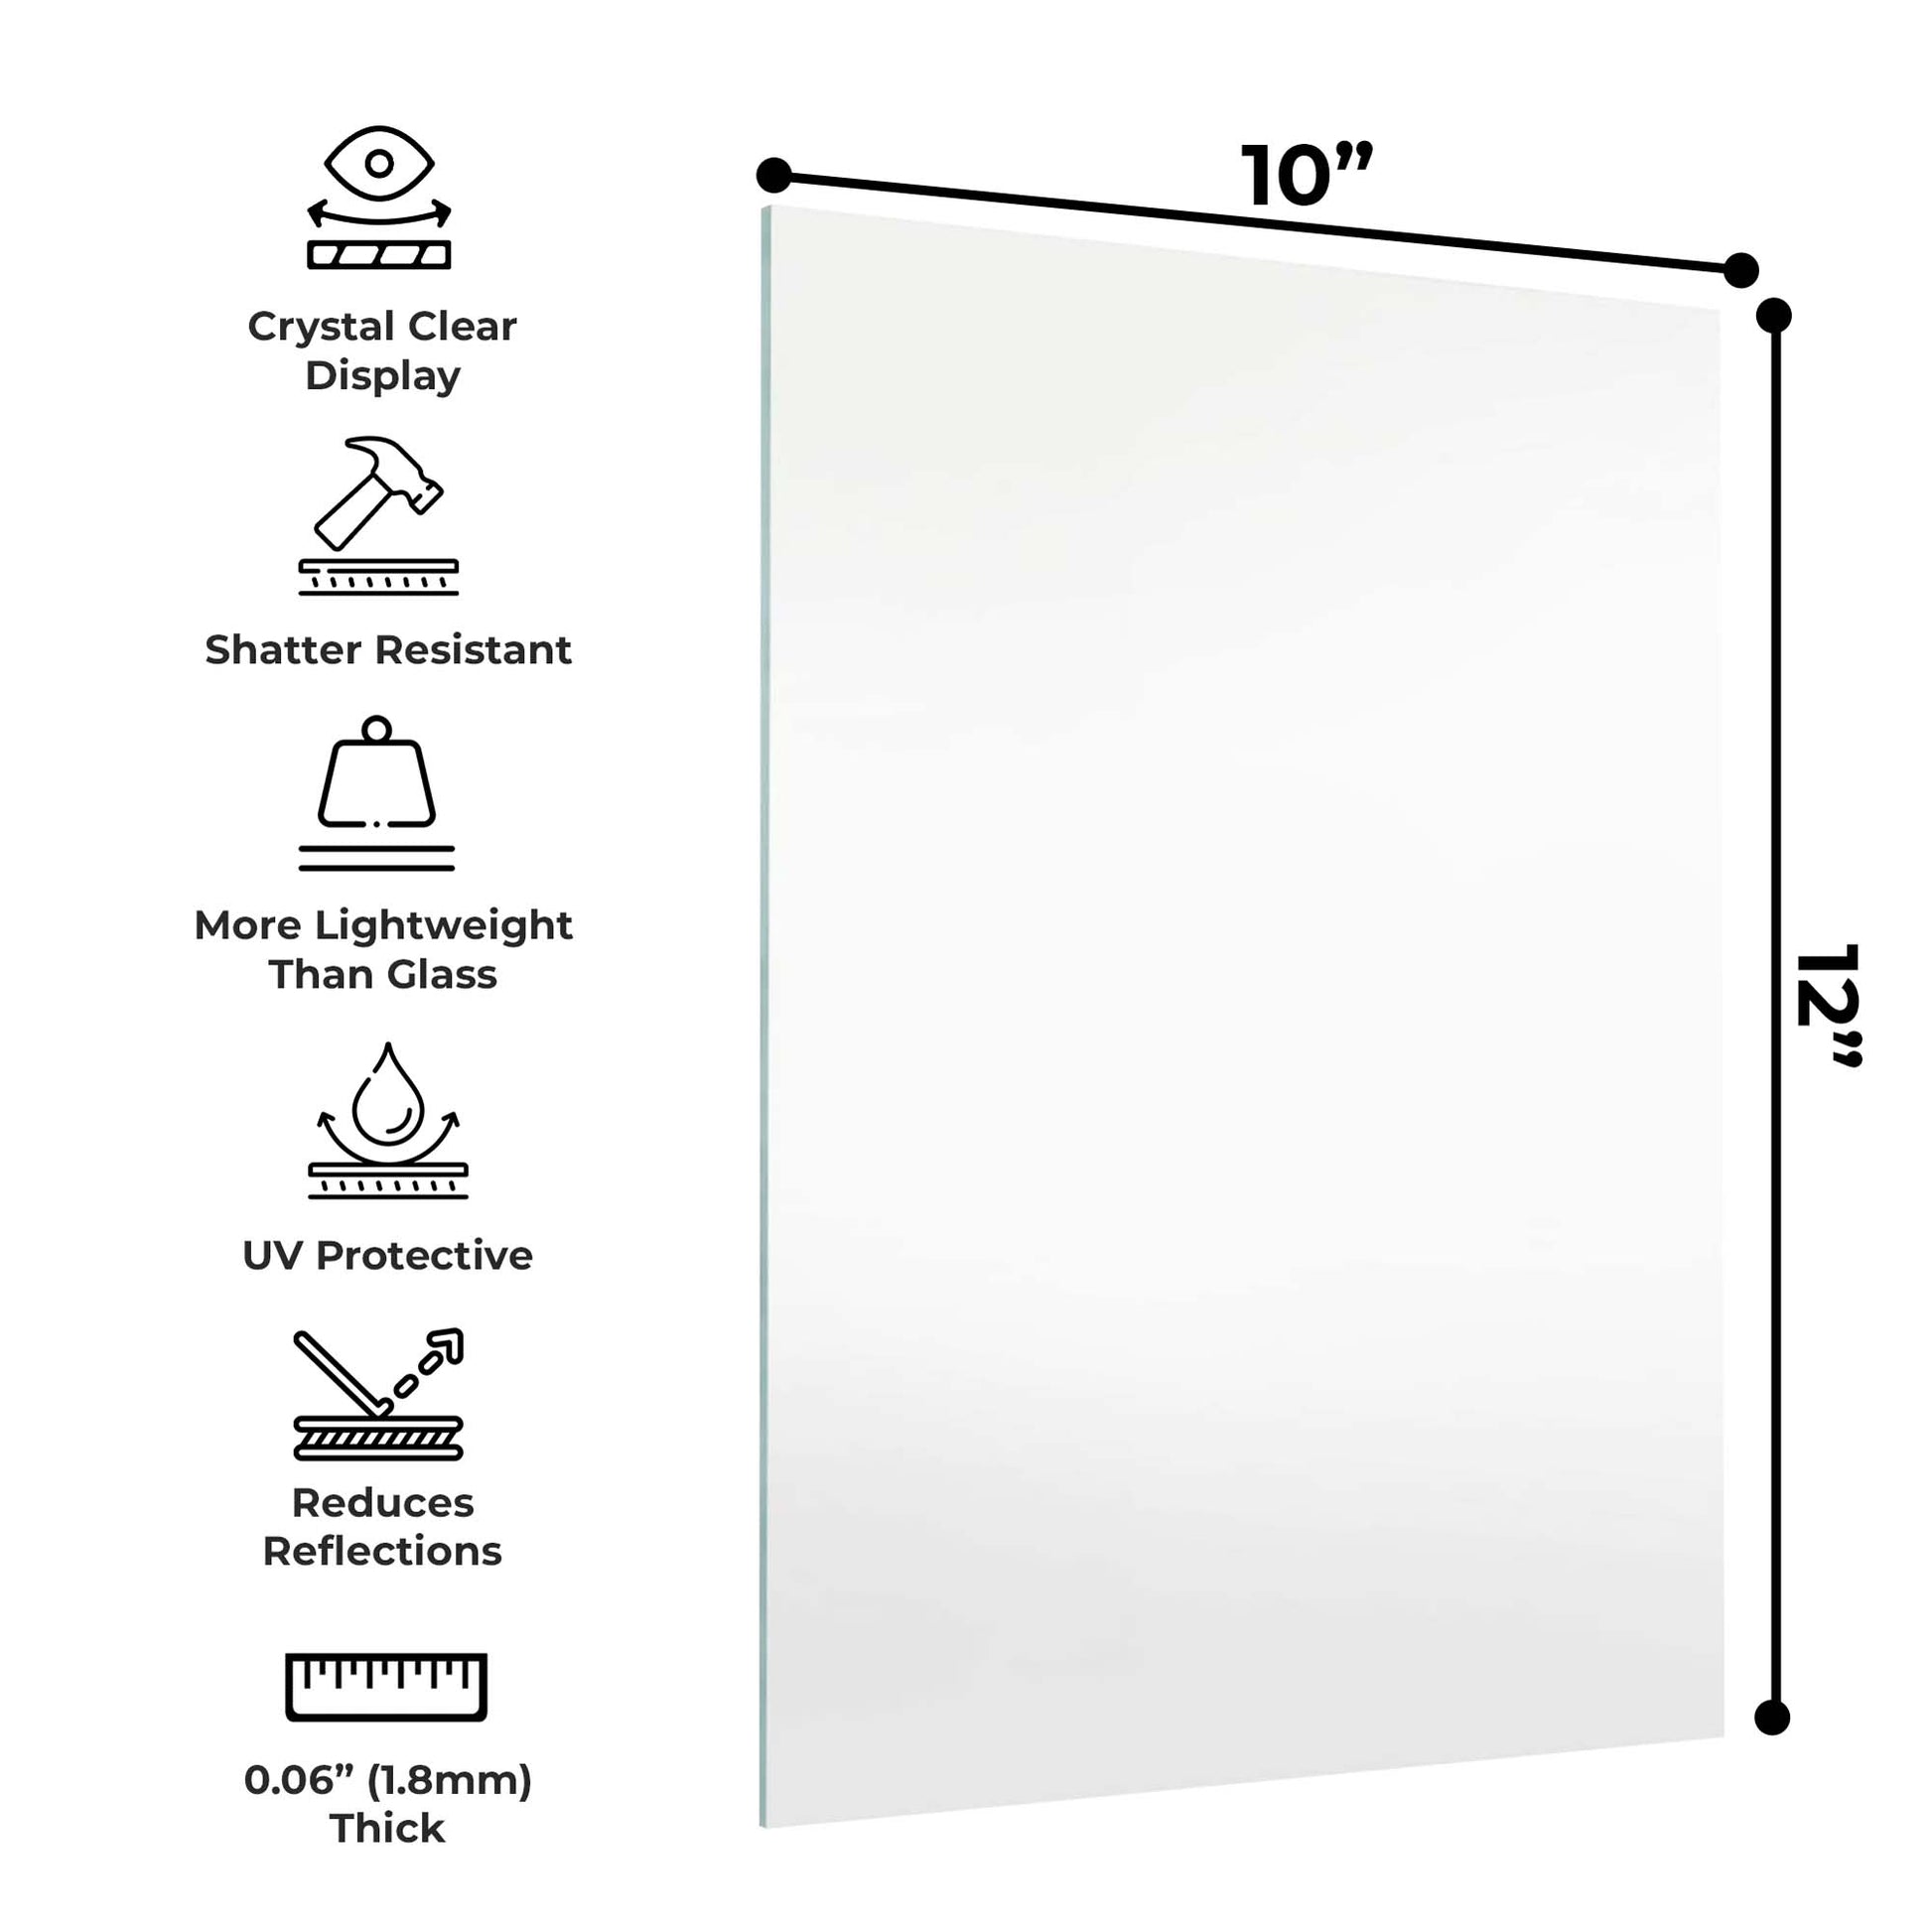 Replacement Picture Frame Glass - Acrylic - Non-Glare Glass